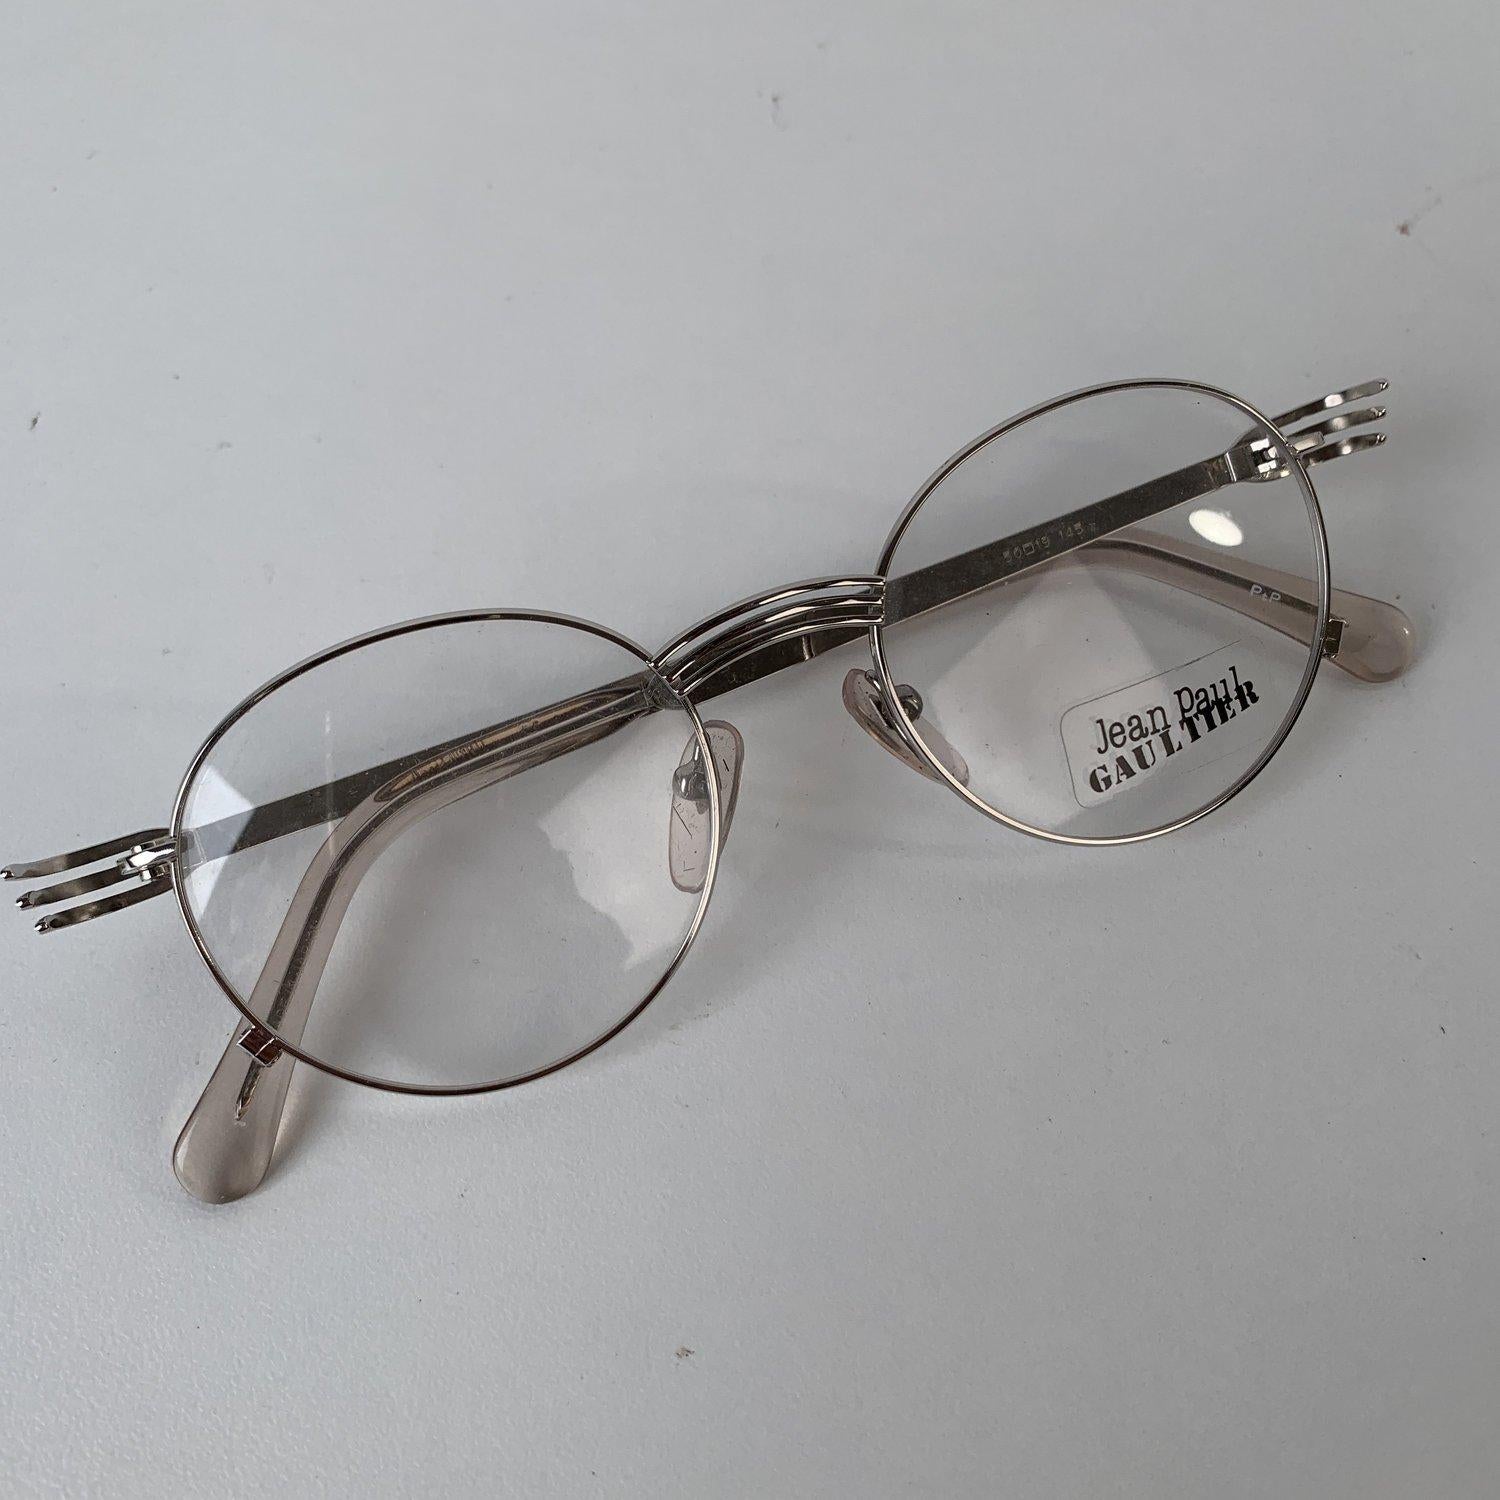 Original Vintage 1990s JEAN PAUL GAULTIER Unisex Sunglasses. Silver metal oval frame. Clear demo lenses. Frame Made in Japan. Mod. 55- 3174 - 50/19 - 145. The temples of the glasses look like forks




Details

MATERIAL: Metal

COLOR: Silver

MODEL: